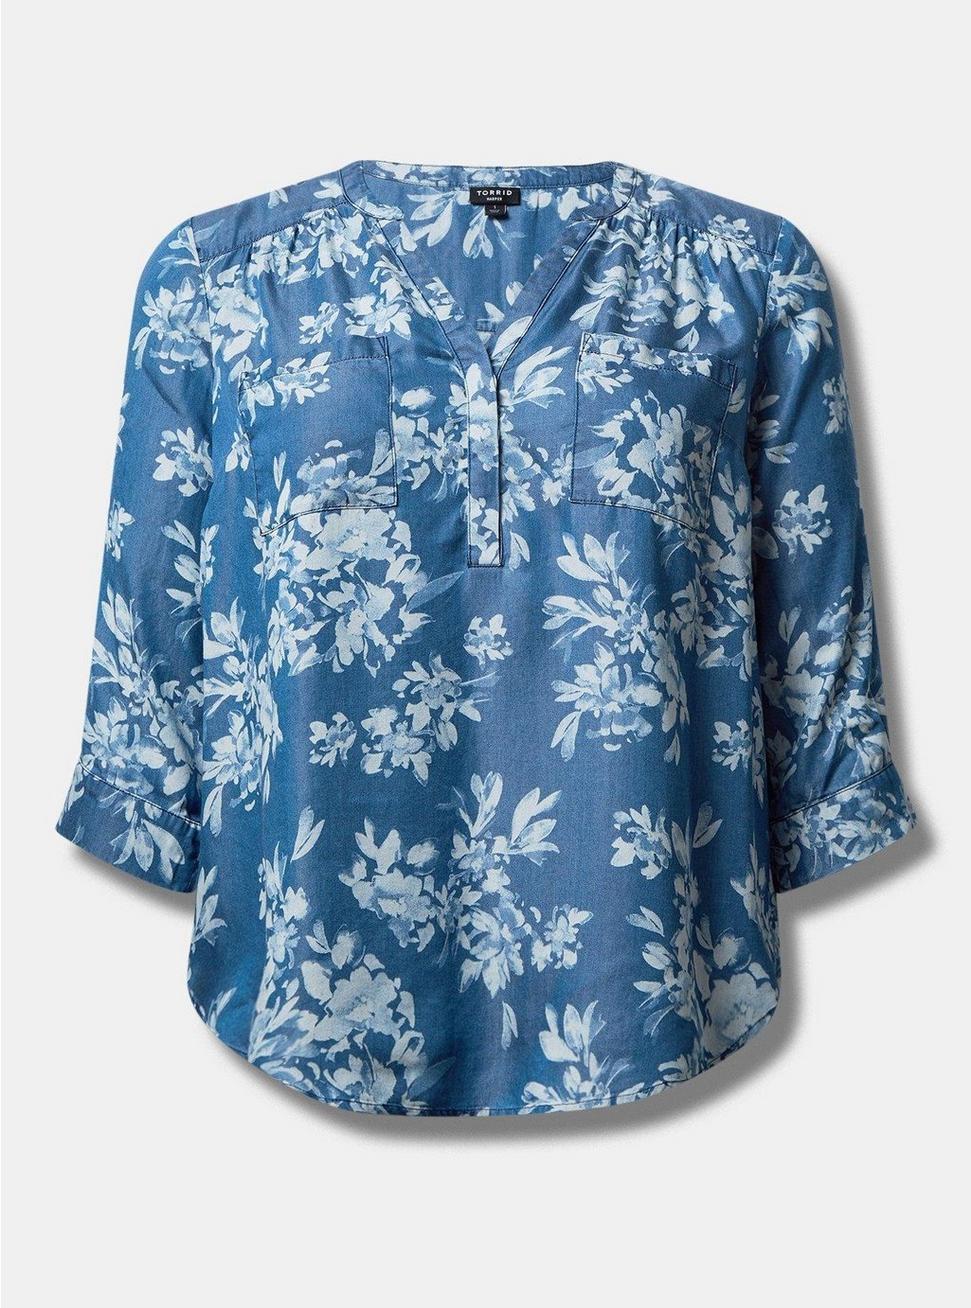 Harper Chambray Pullover 3/4 Sleeve Top, WATERFALL FLORAL, hi-res